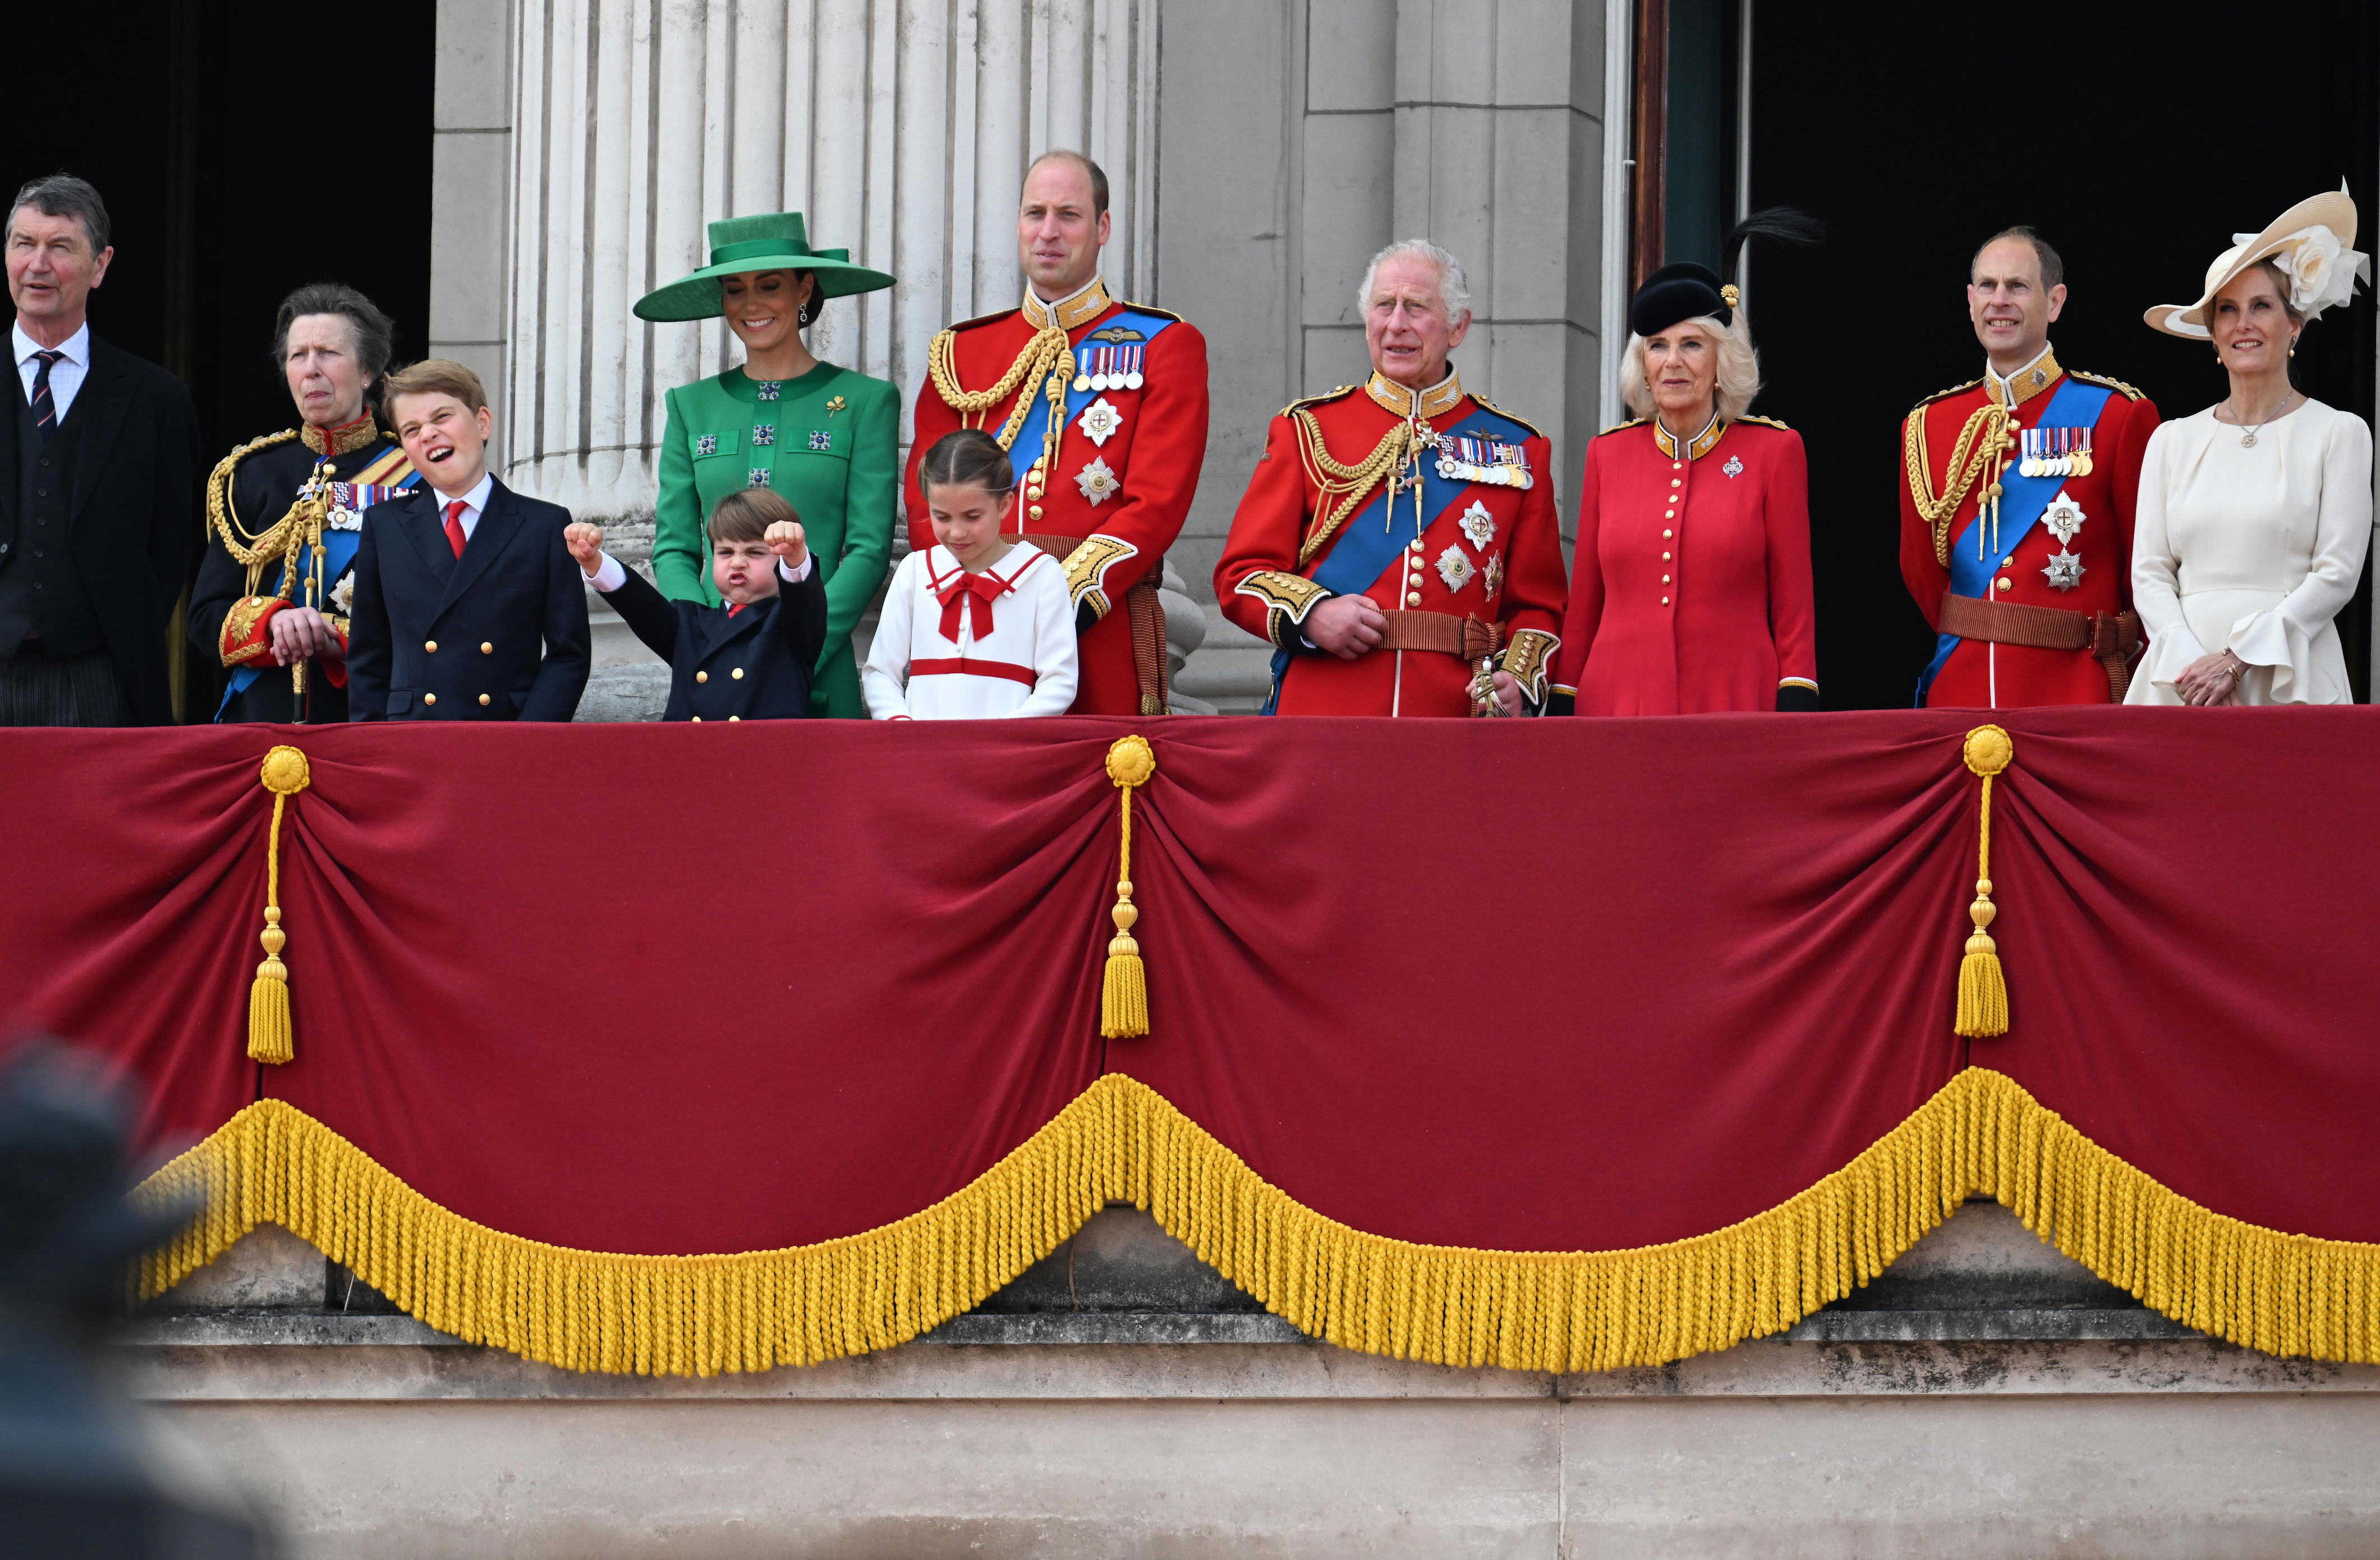 <p>The slimmed-down royal family -- Sir Timothy Laurence and wife Princess Anne; Prince George, Prince Louis, Princess Charlotte and parents Princess Kate and Prince William; King Charles III and Queen Camilla; and Prince Edward and wife Sophie, Duchess of Edinburgh -- stood on the balcony of Buckingham Palace to watch a fly-past of Royal Air Force aircraft during <a href="https://www.wonderwall.com/celebrity/royals/trooping-the-colour-2023-king-charles-iii-celebrates-the-first-of-his-reign-752078.gallery">Trooping the Colour</a> in London on June 17, 2023.</p>